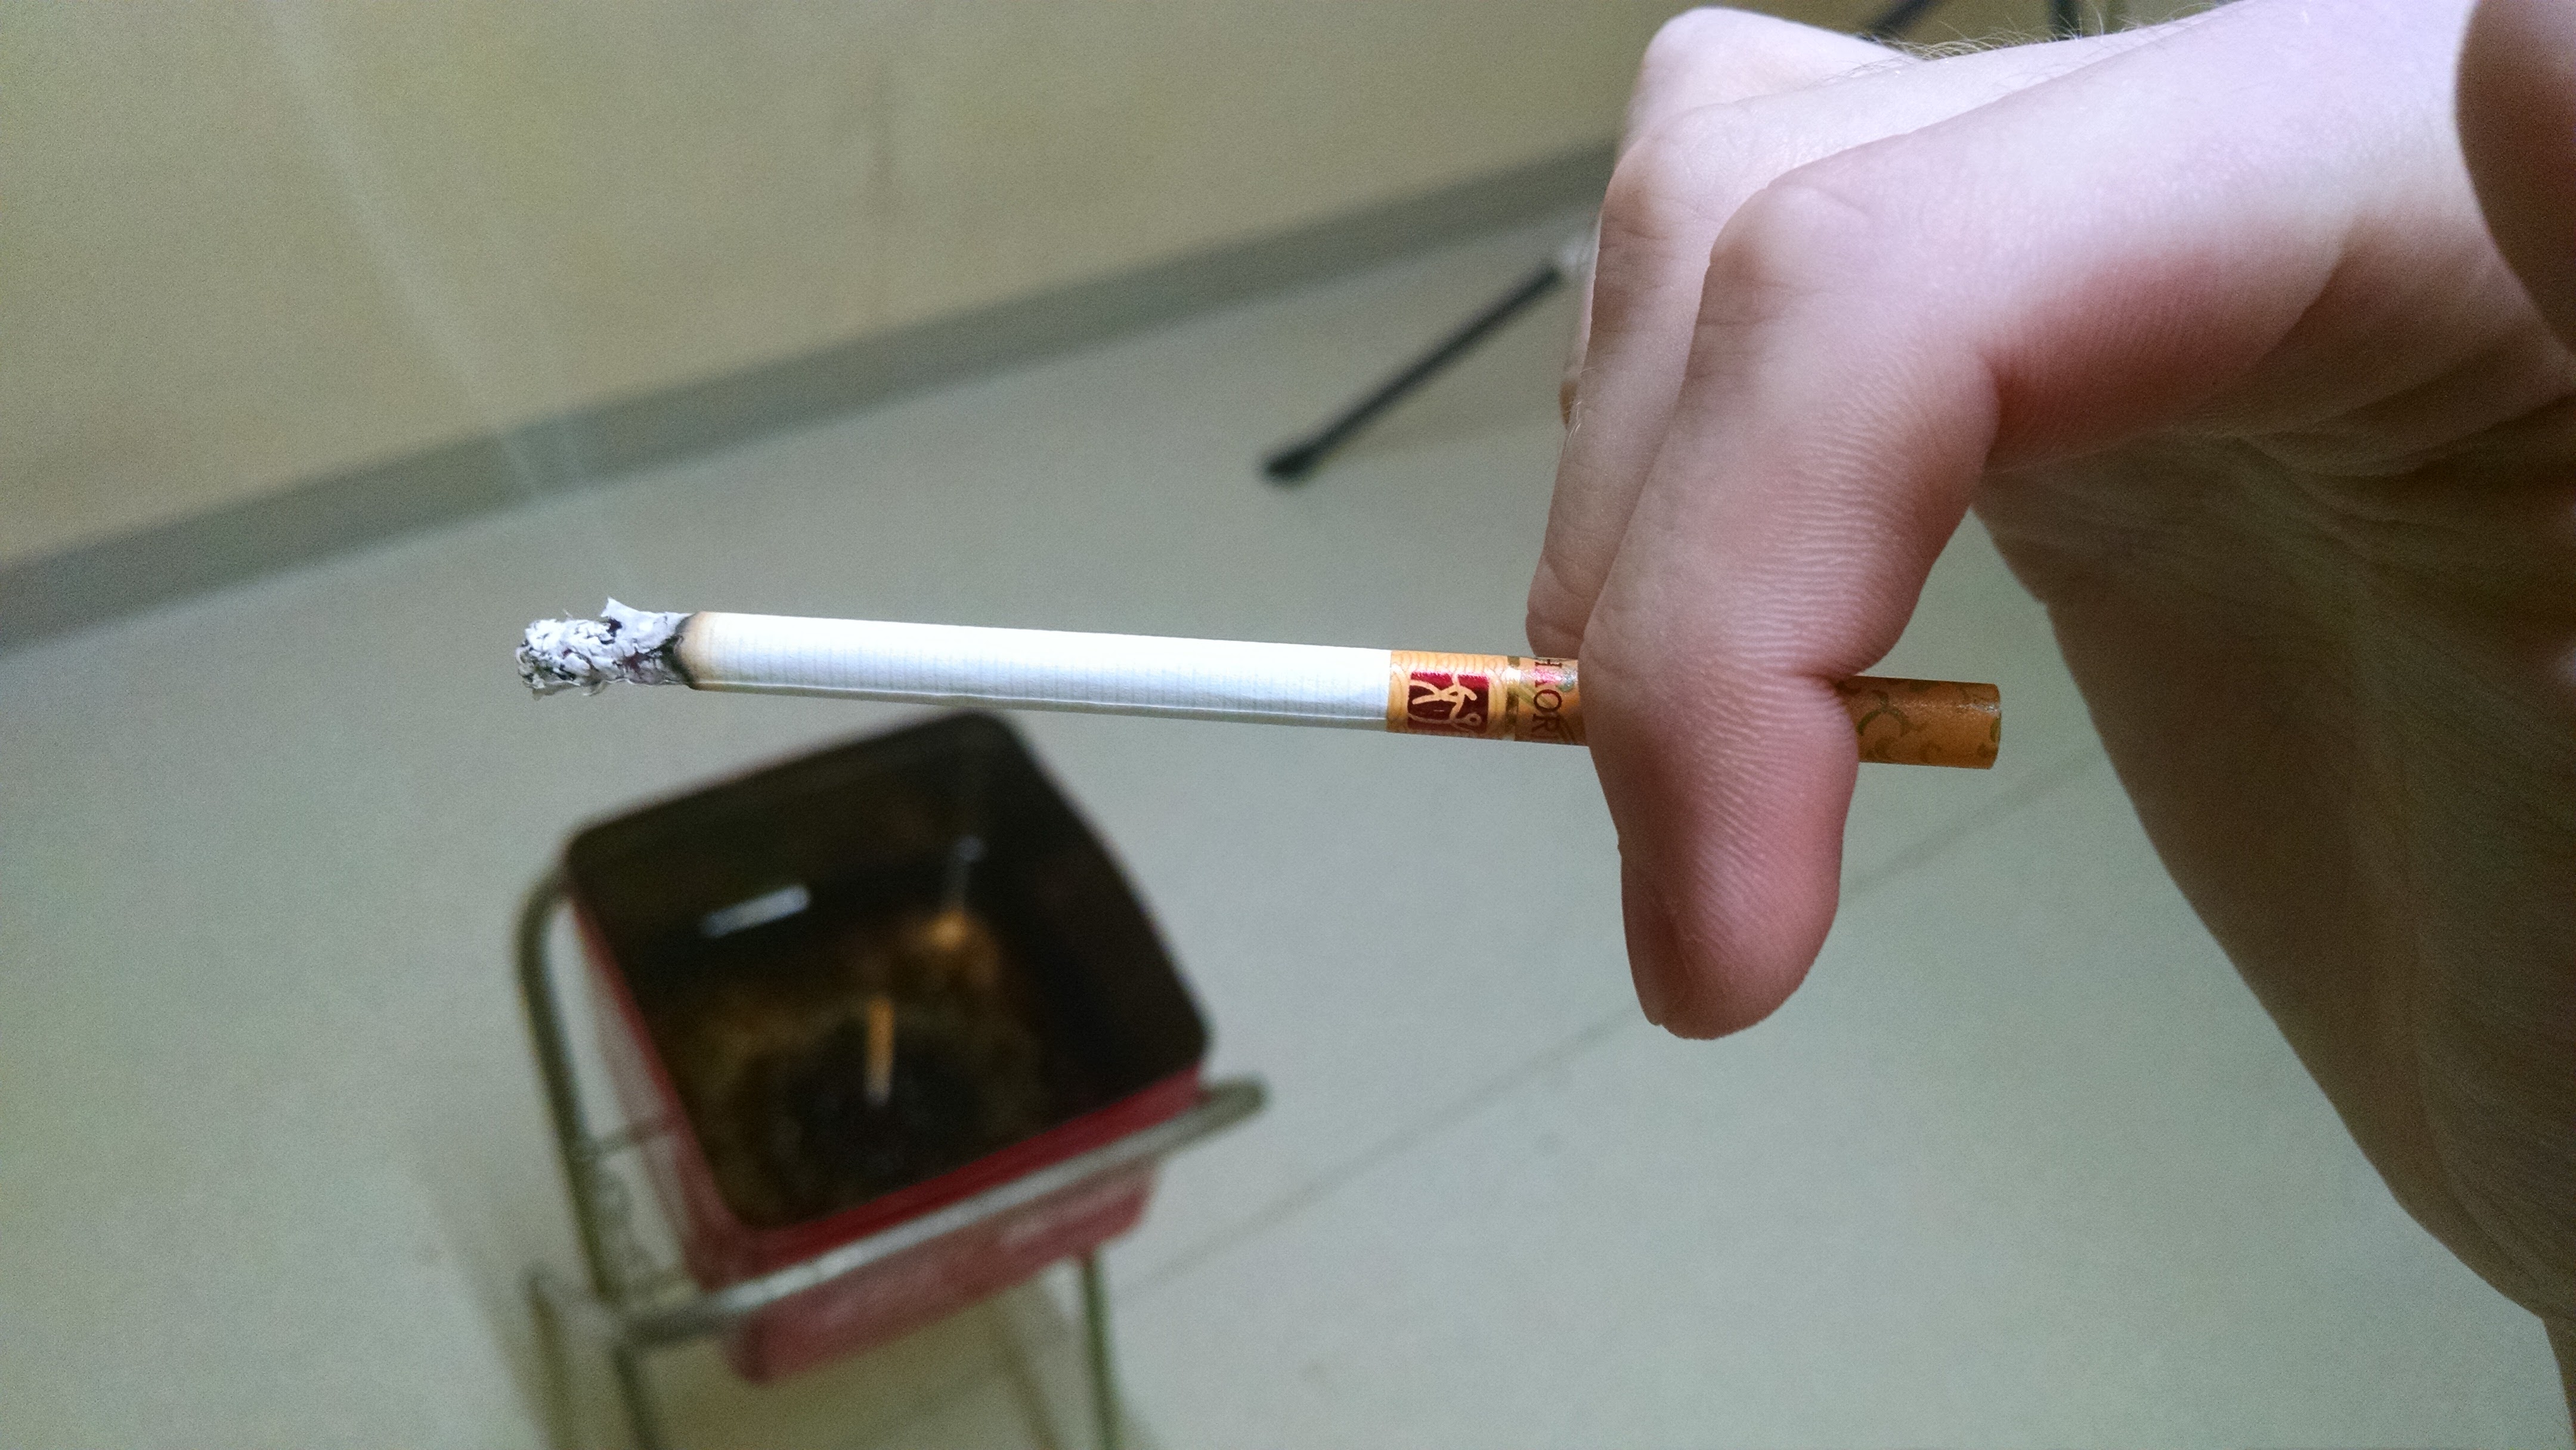 A Very Thin Chinese Cigarette